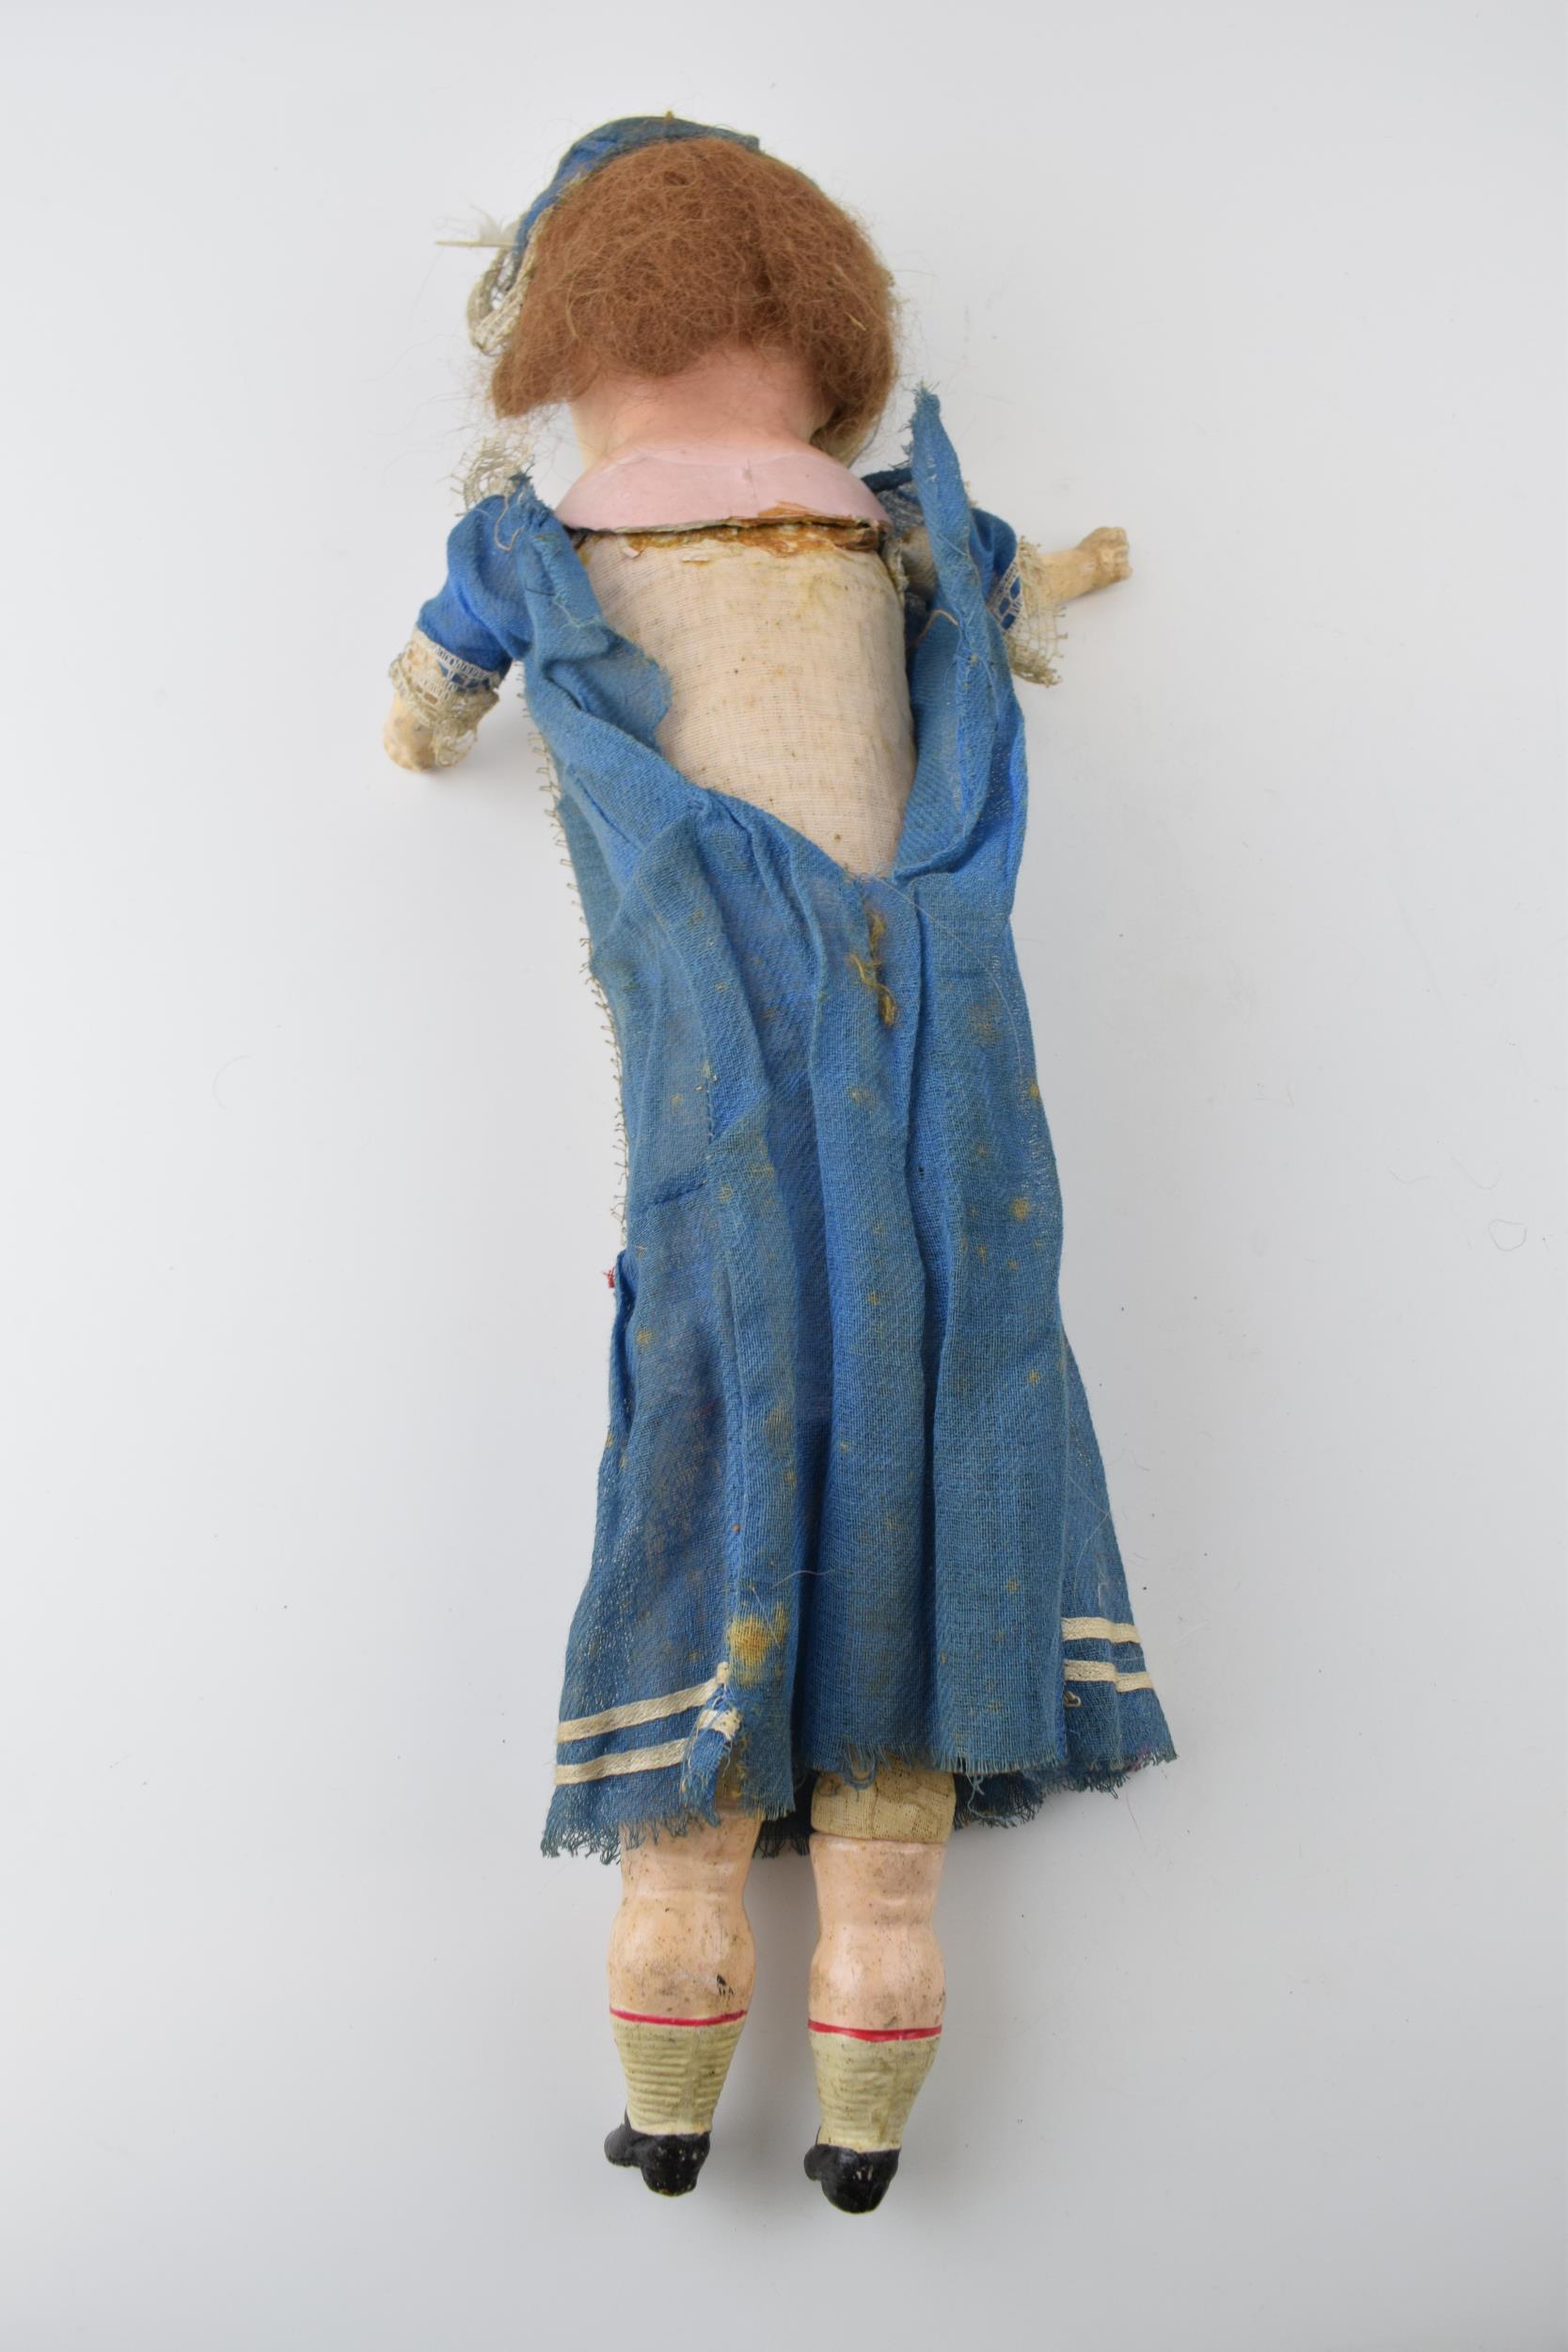 Wax head antique doll in blue dress c1860. Height 54cm. In good antique condition with some light - Image 7 of 7